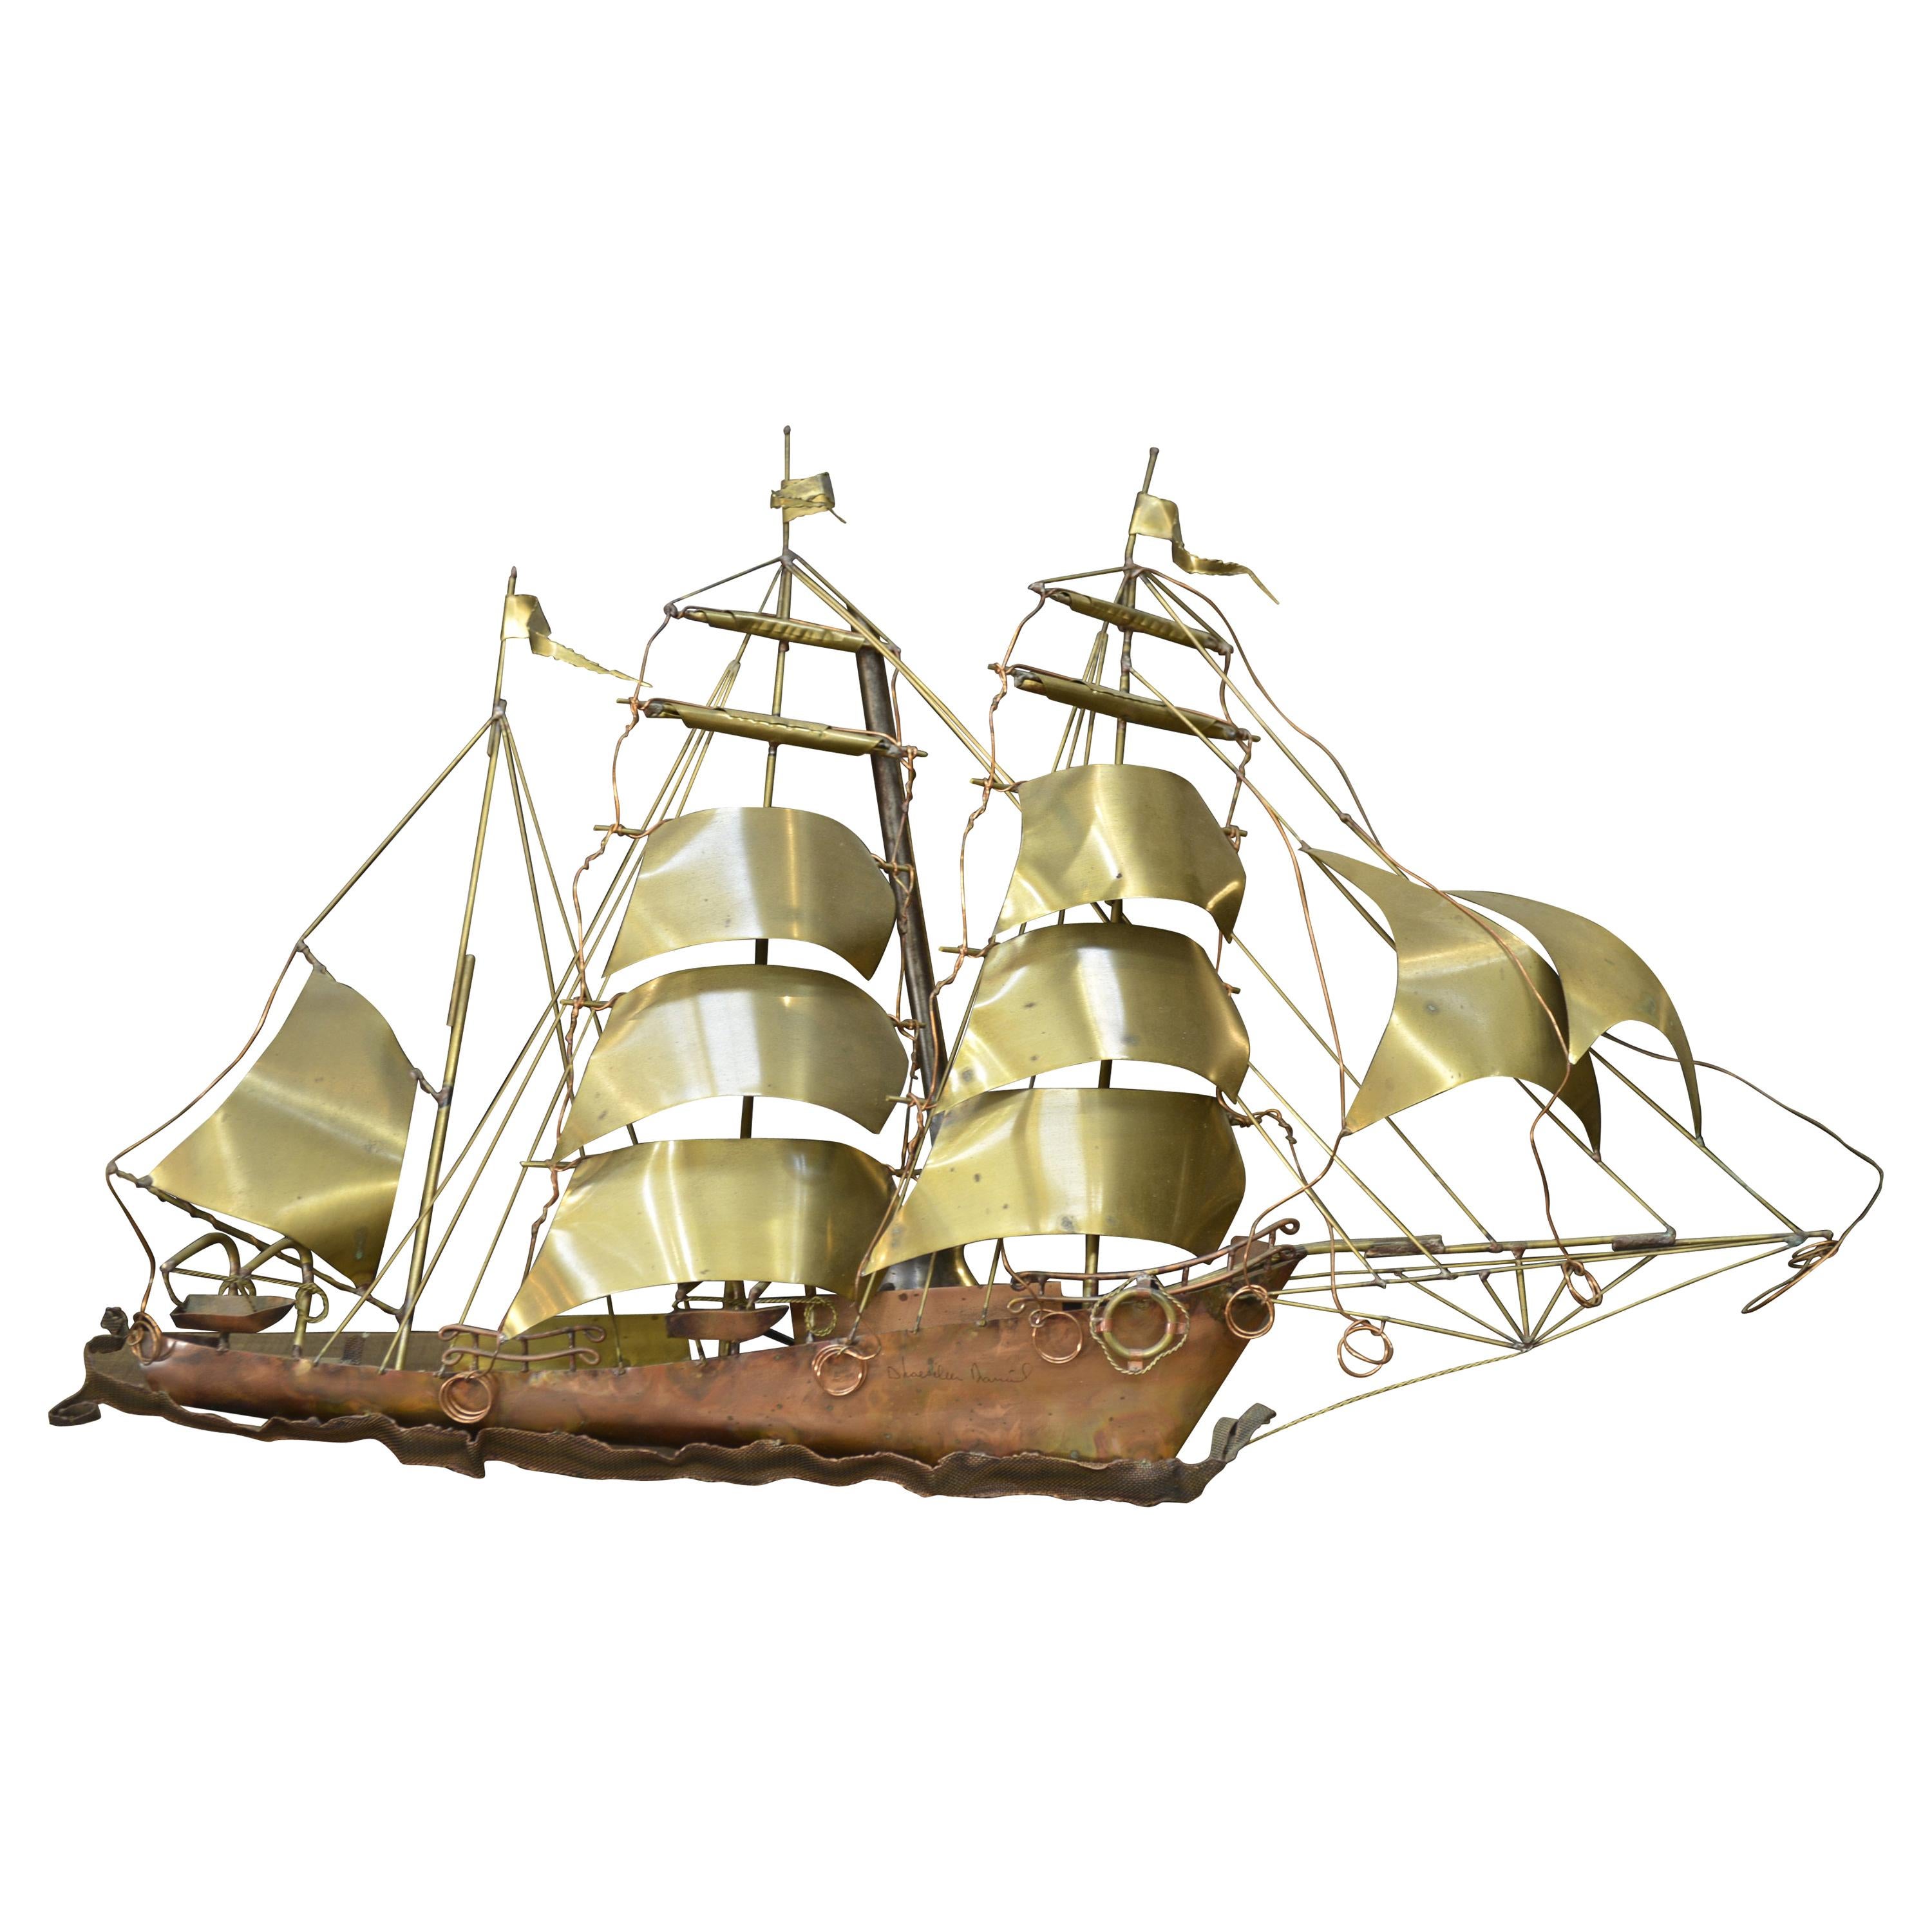 Brass Sconce Boat Sculpture by Daniel d'Haeseleer, circa 1970 For Sale